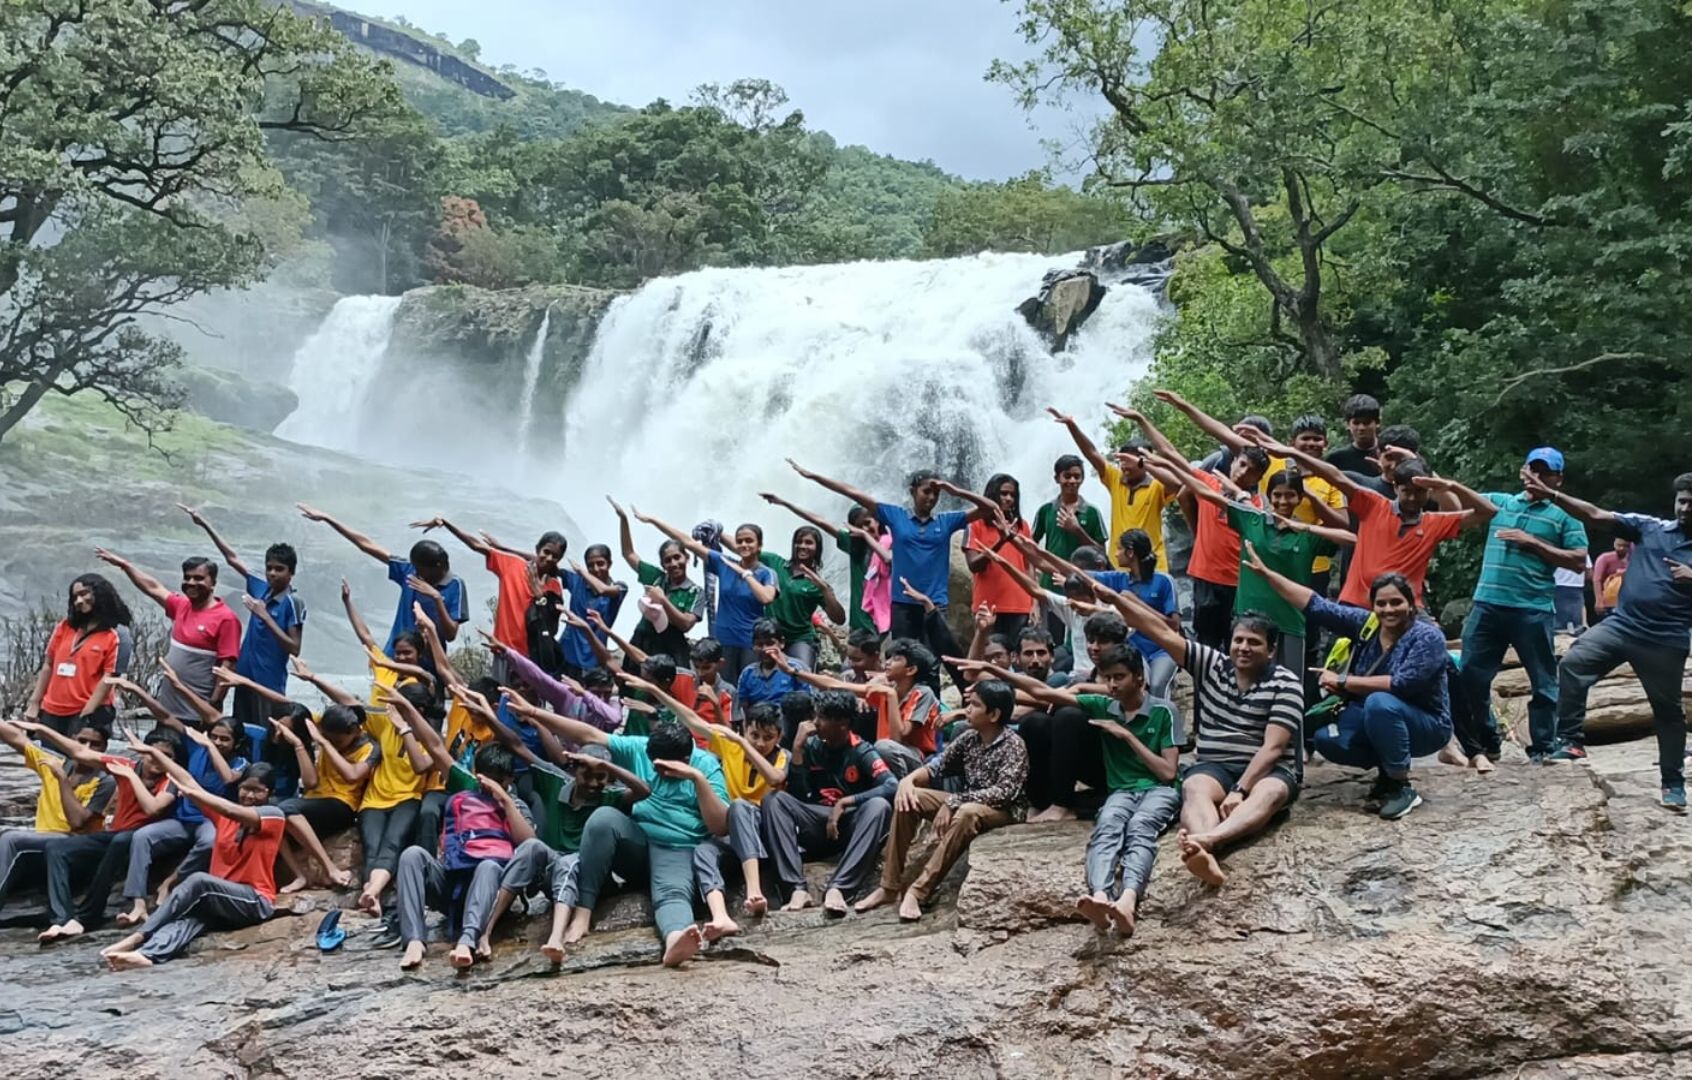 Student group tours for falls